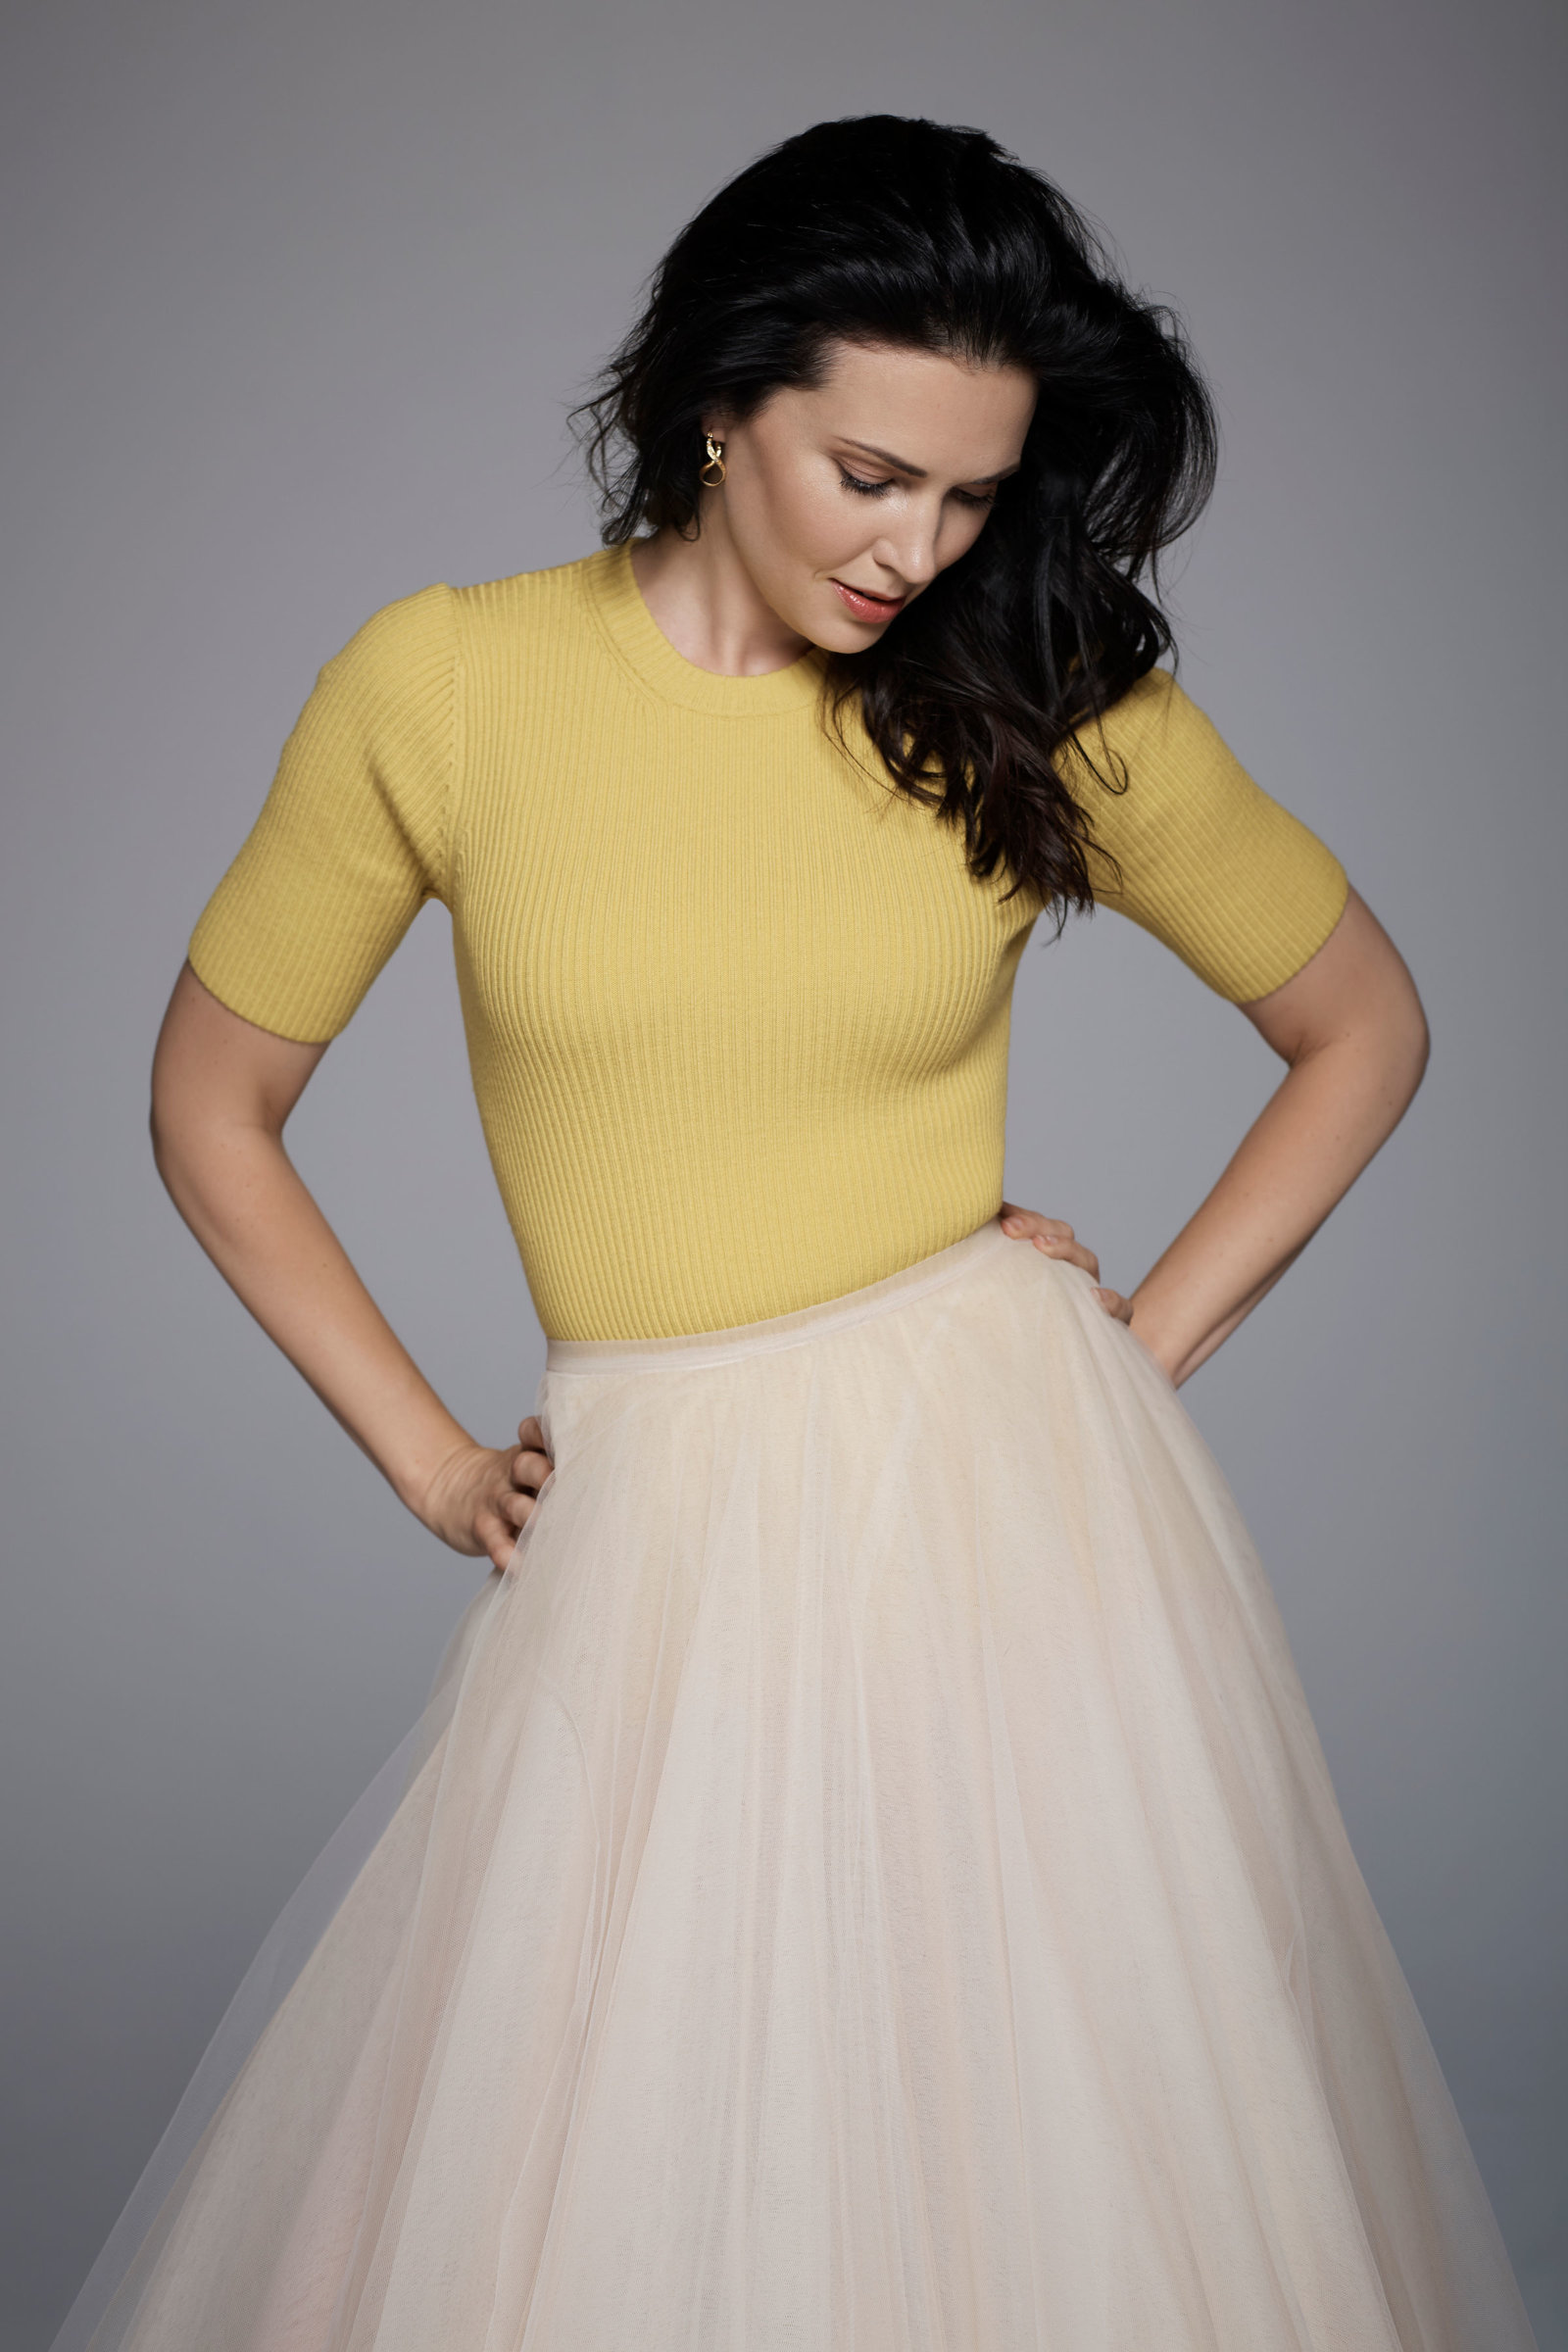 Laura Mennell Interview